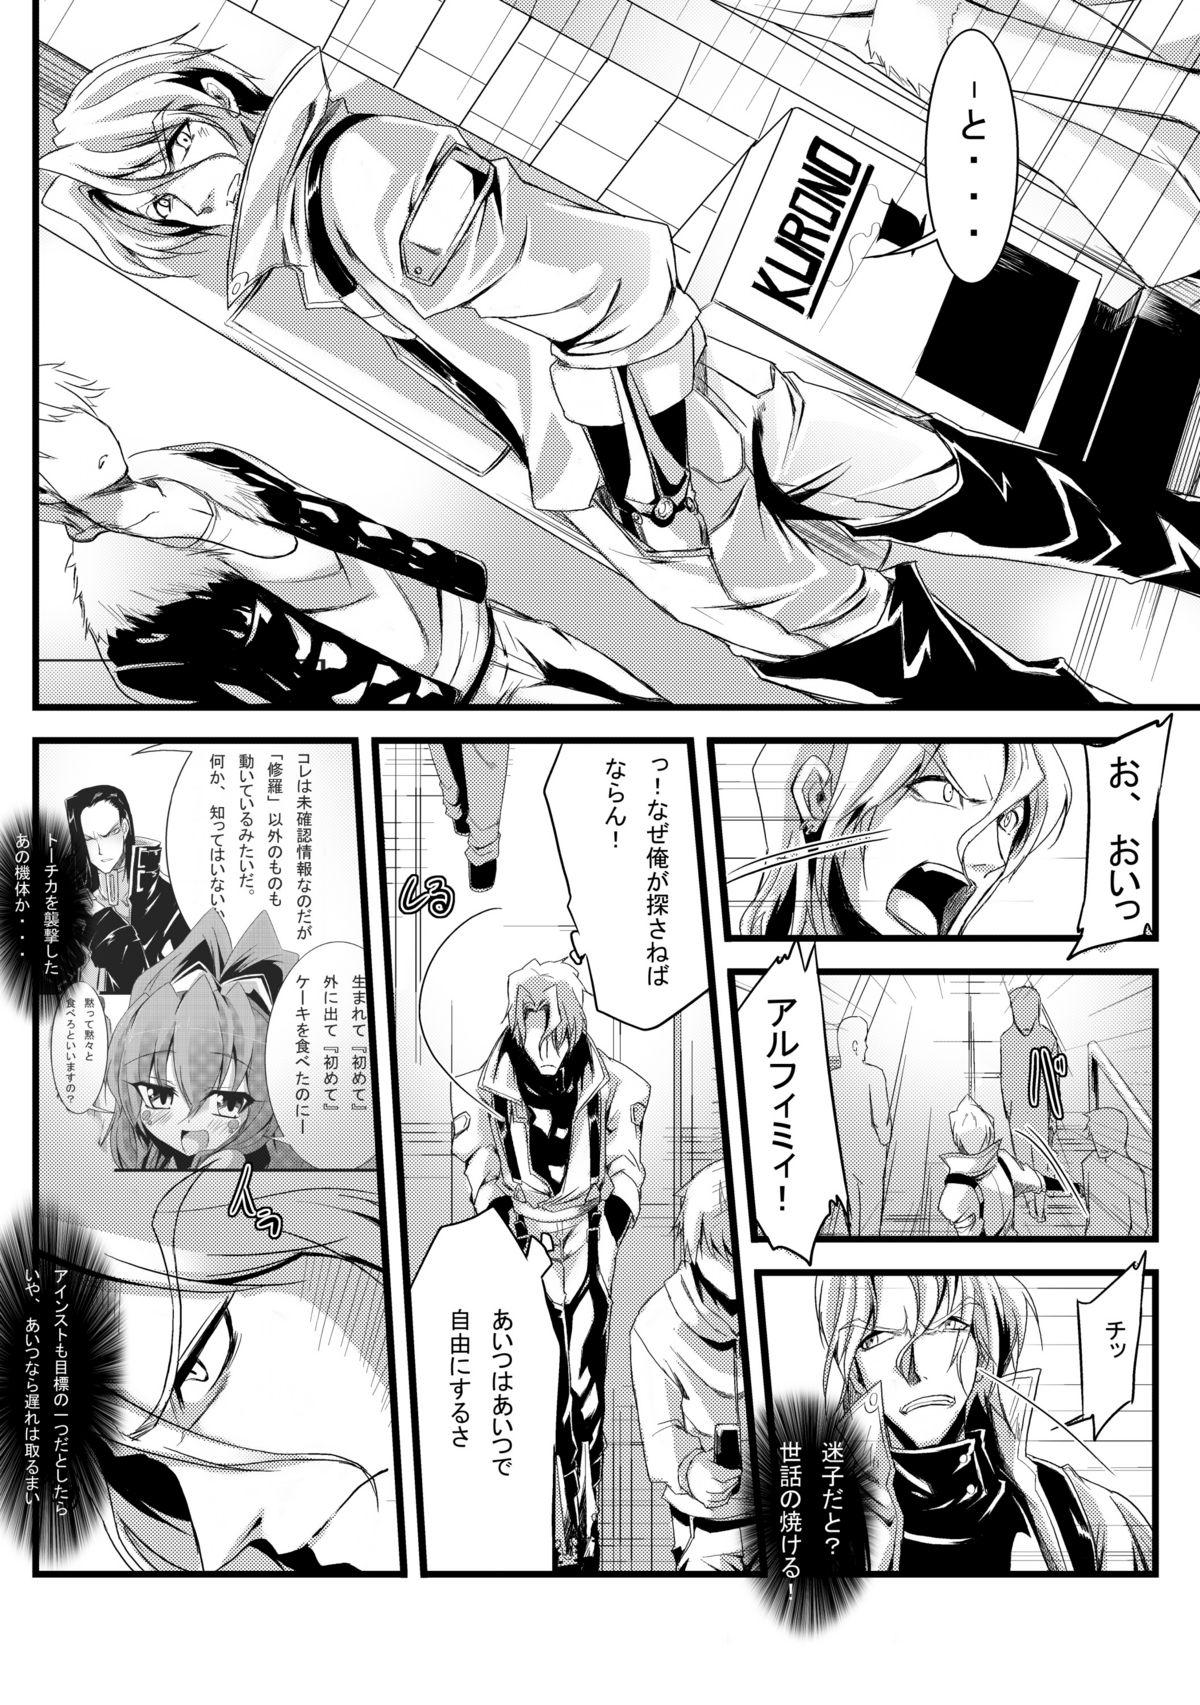 Blowjob Contest Alchemie to Issho ! - Super robot wars Facial - Page 9